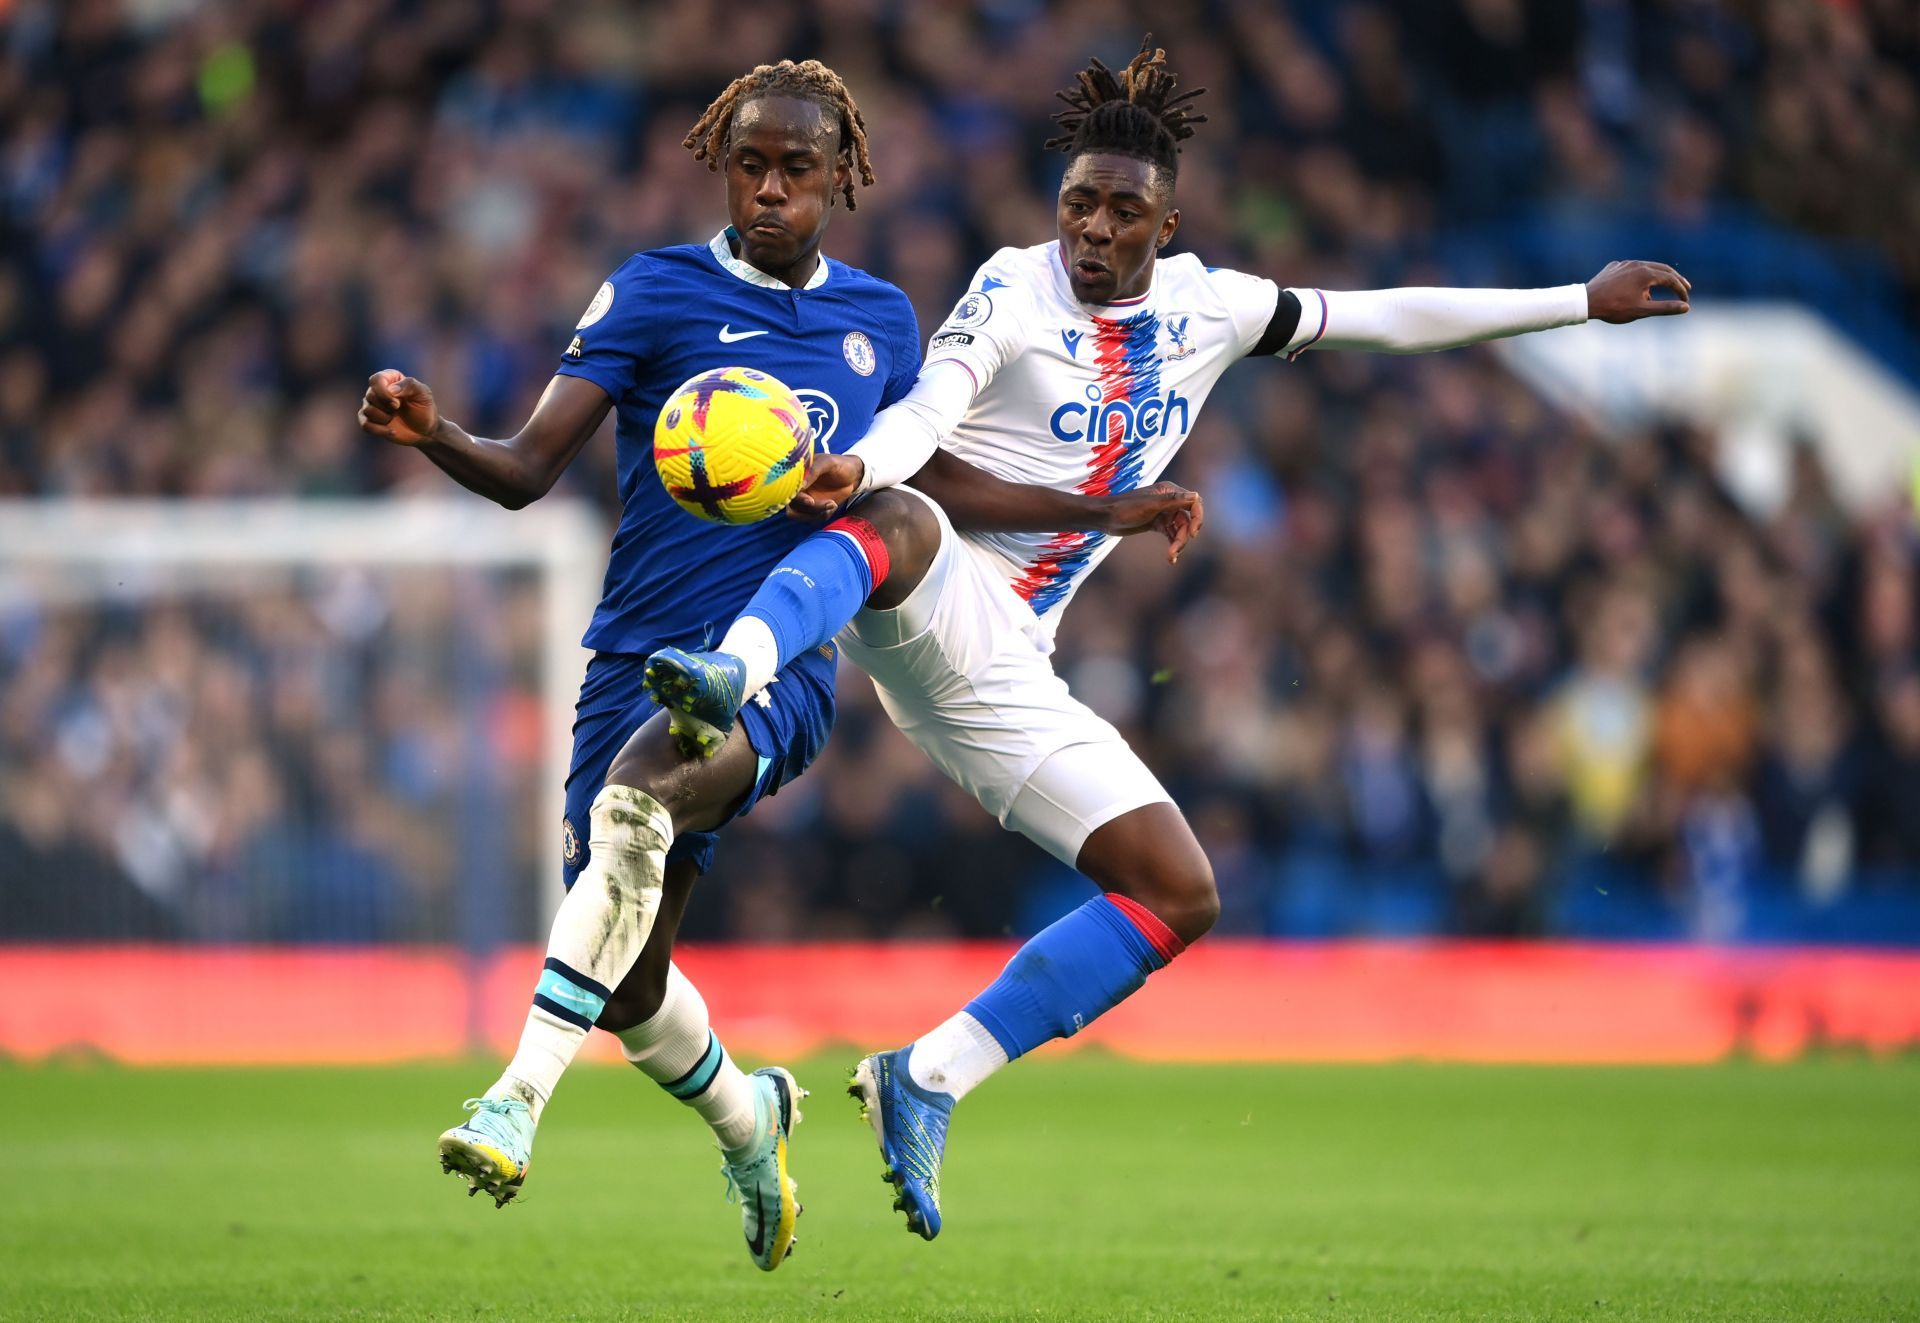 Chalobah was impressive at right-back against Crystal Palave